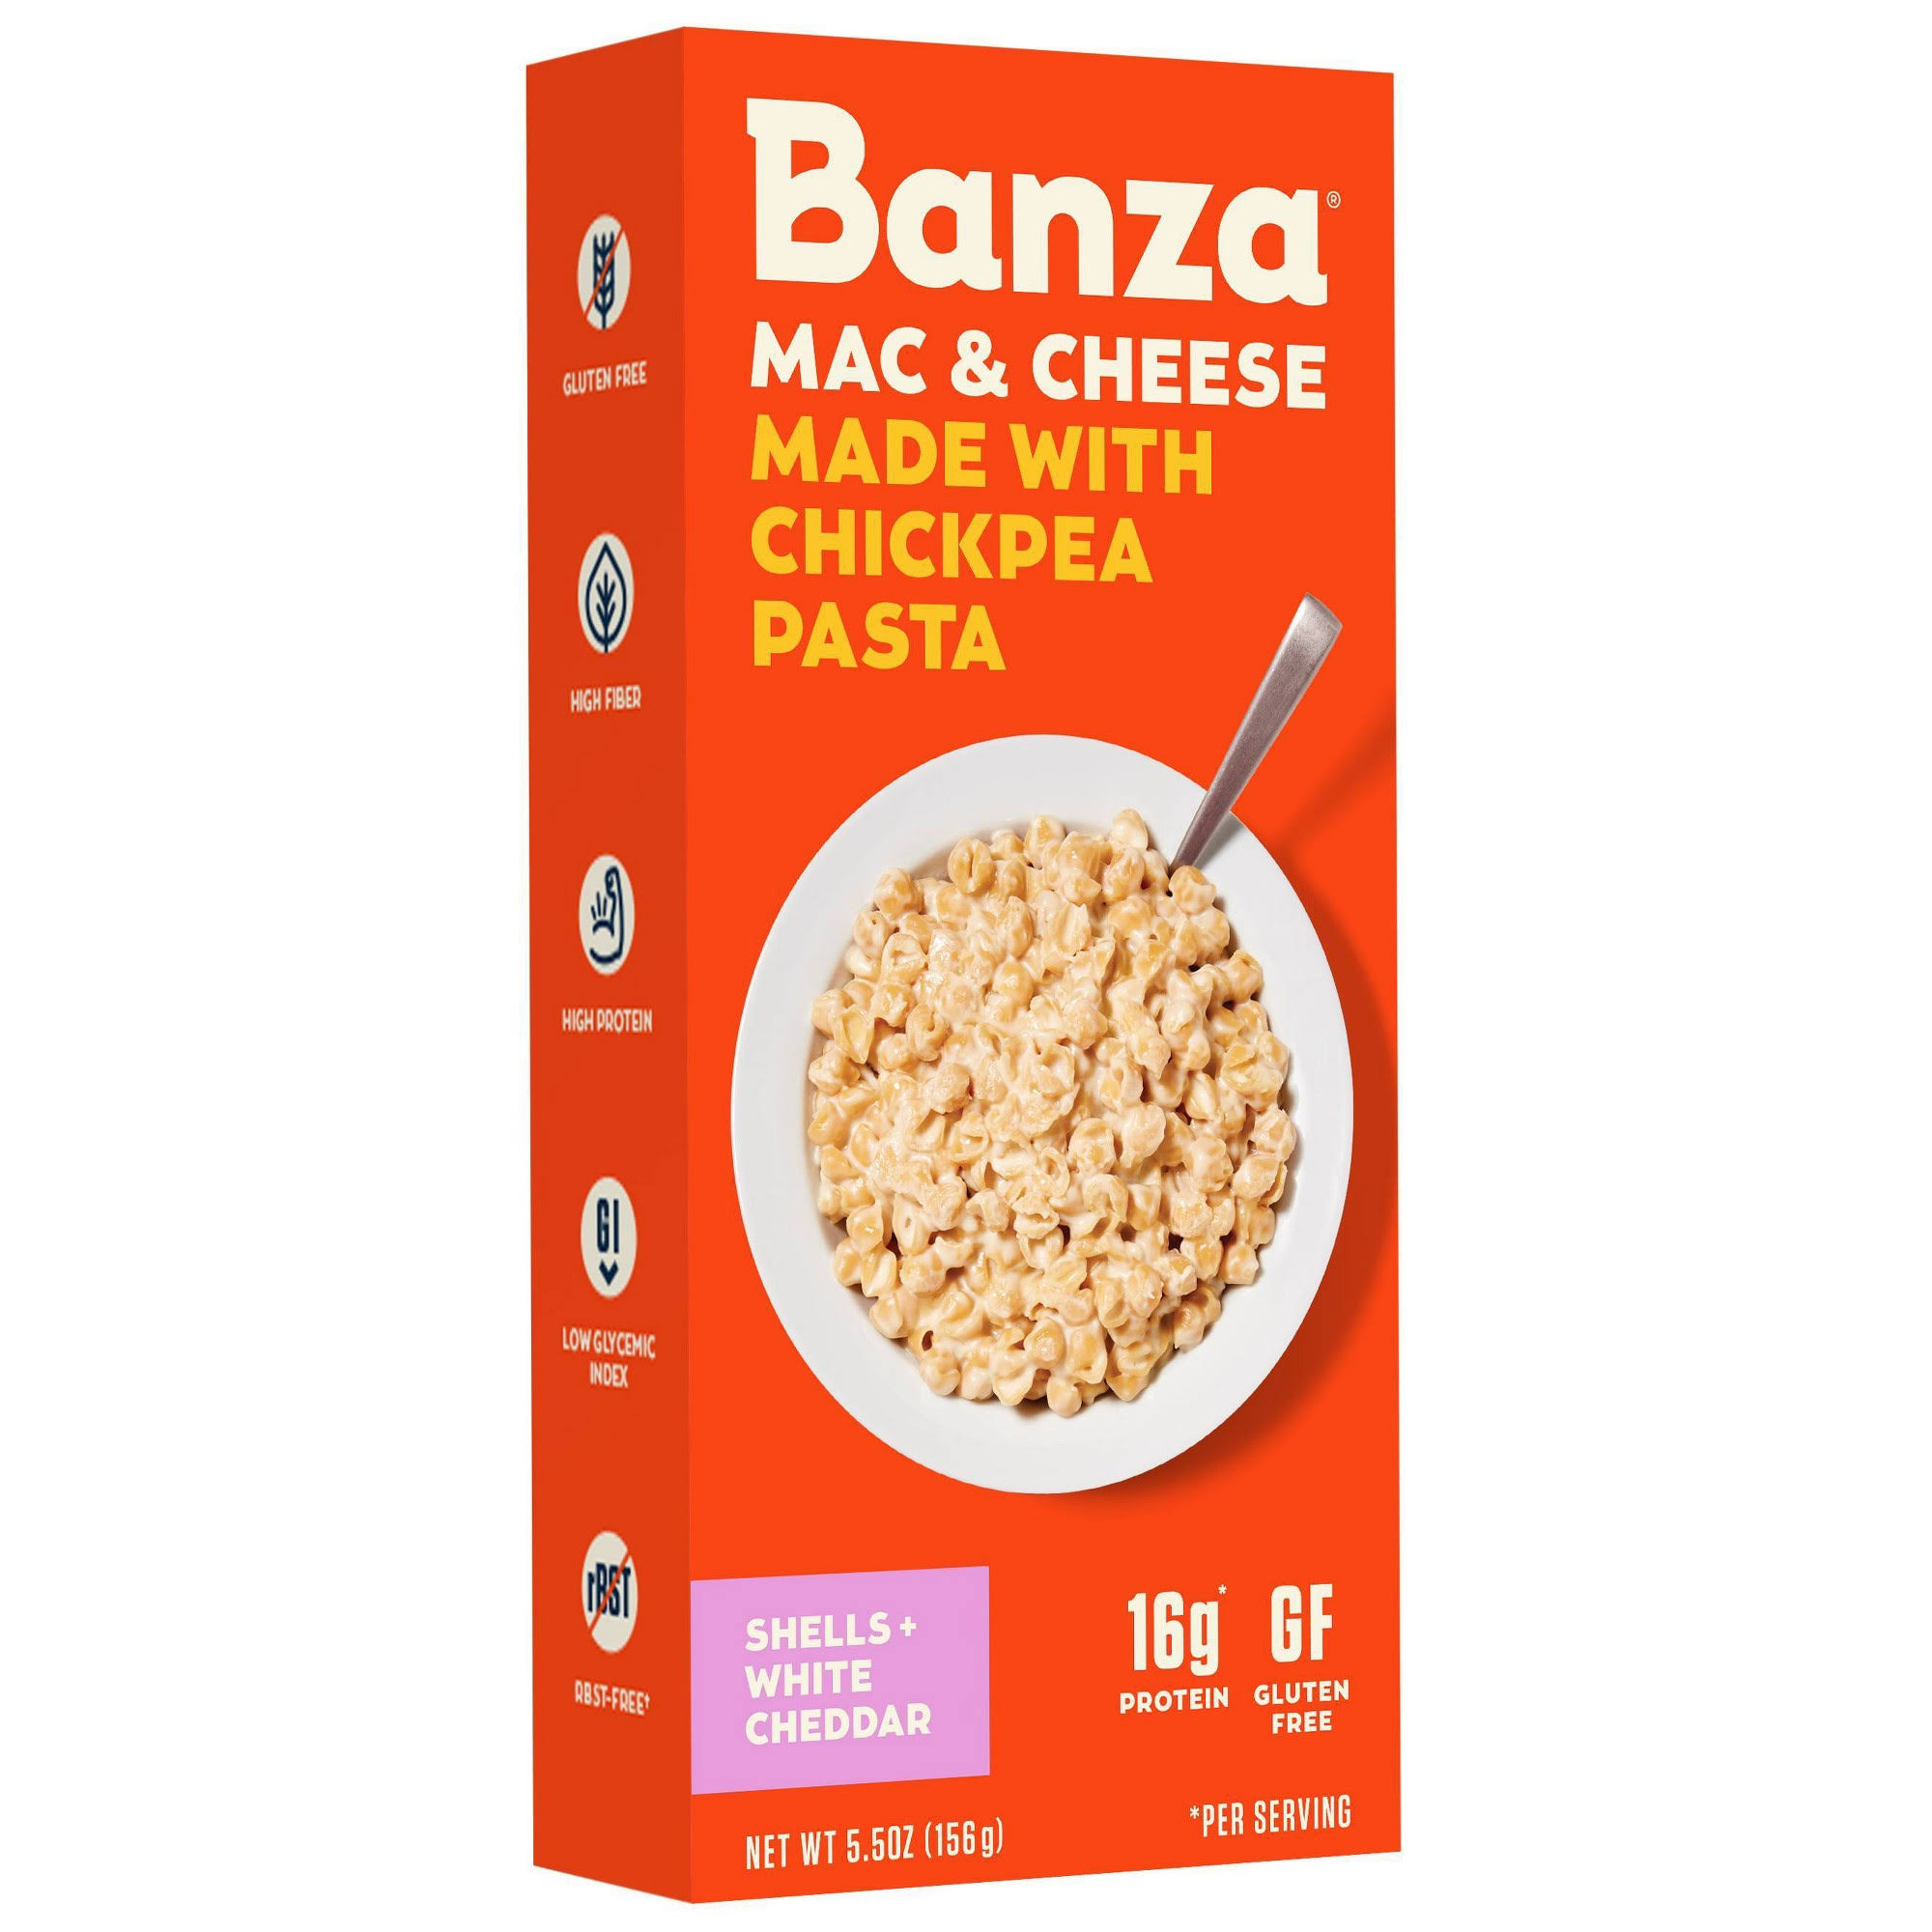 Banza Mac & Cheese, Made With Chickpea Pasta, White Cheddar - 5.5 oz